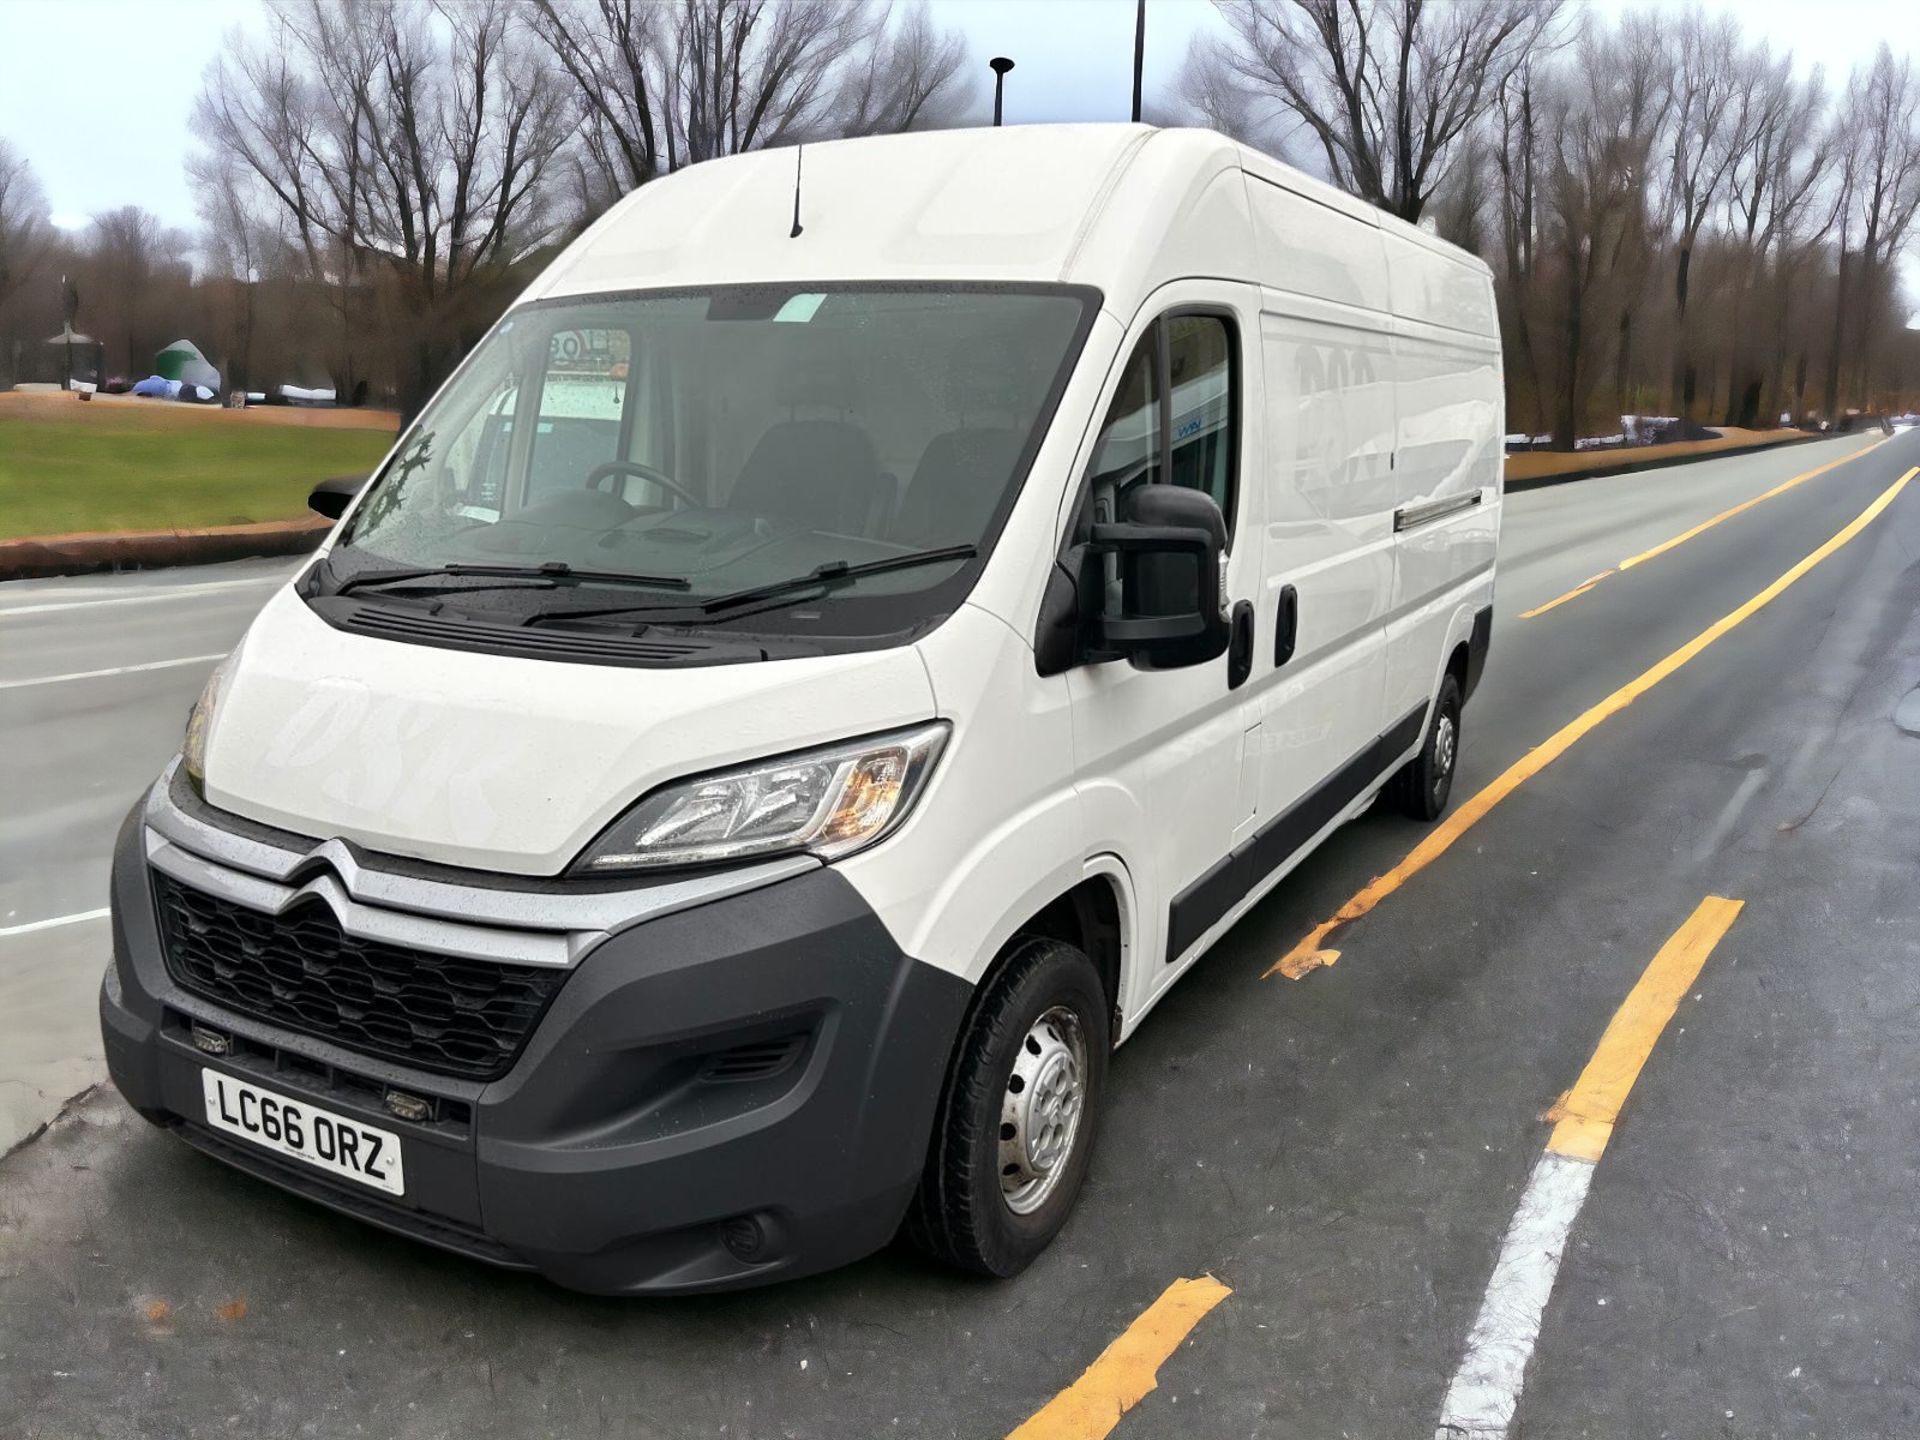 2016-66 REG CITROEN RELAY 35 L3H2 LWB- HPI CLEAR - READY TO GO! - Image 2 of 12